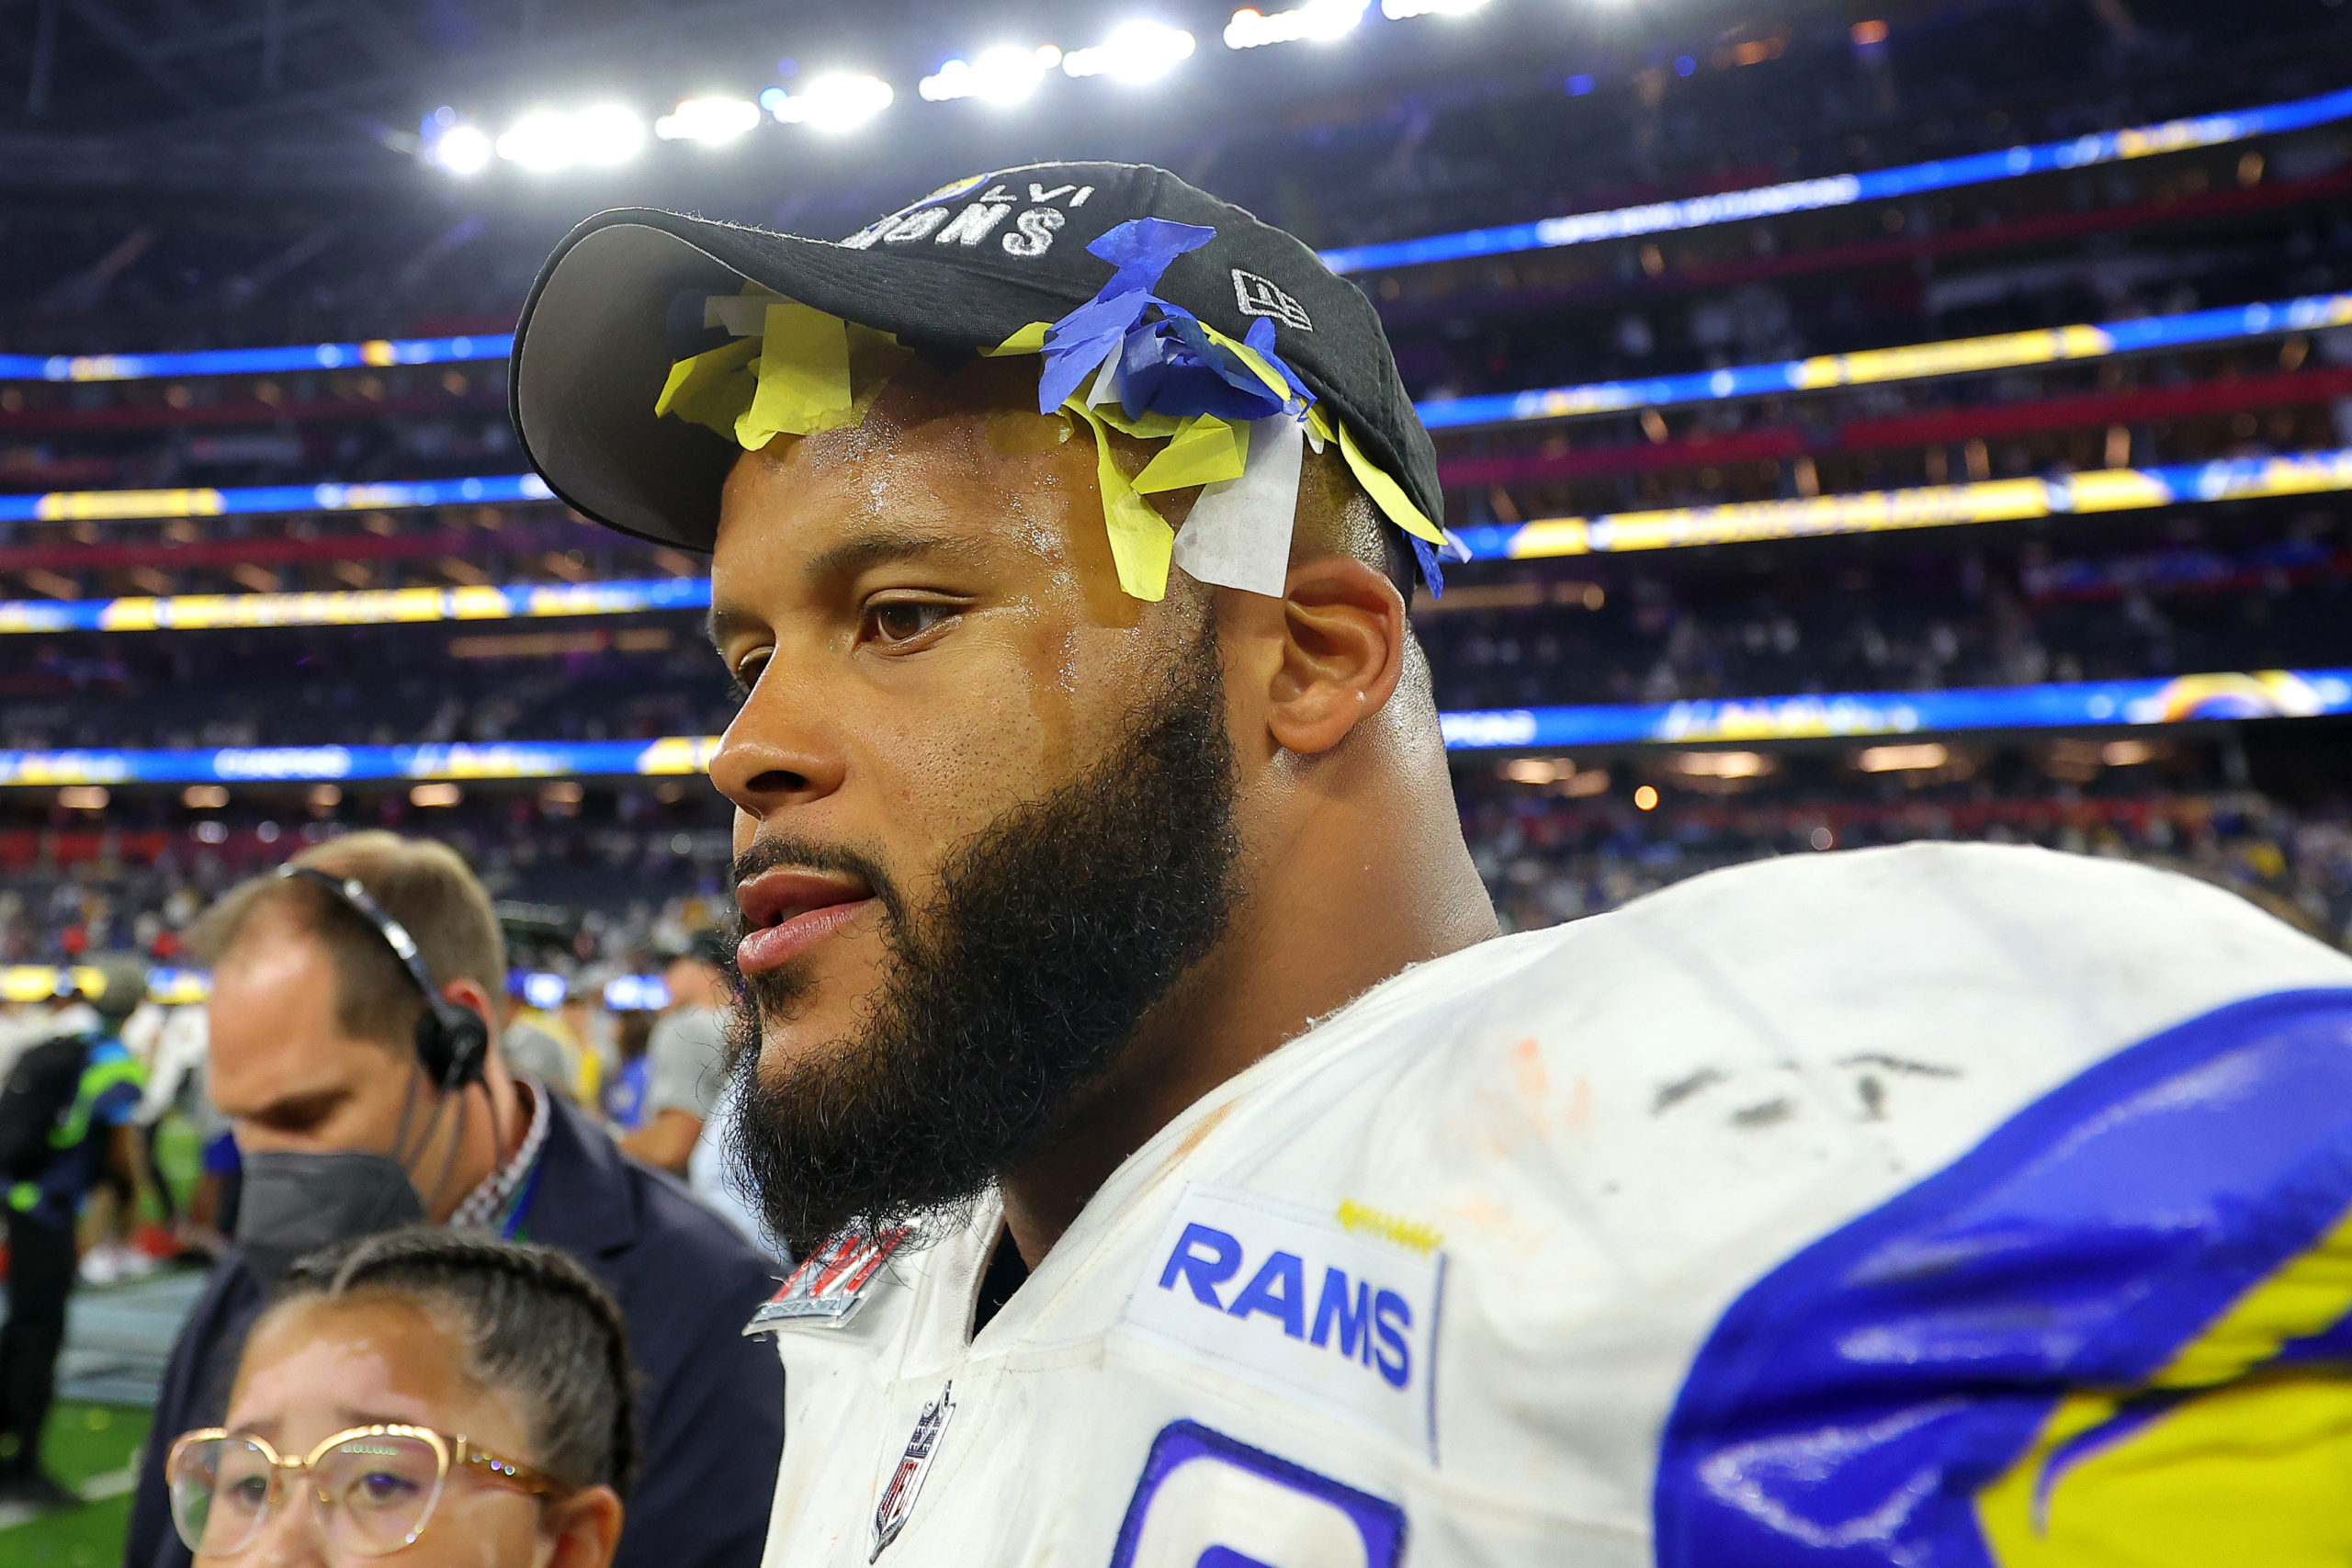 INGLEWOOD, CALIFORNIA - FEBRUARY 13: Aaron Donald #99 of the Los Angeles Rams celebrates after defeating the Cincinnati Bengals during Super Bowl LVI at SoFi Stadium on February 13, 2022 in Inglewood, California. The Los Angeles Rams defeated the Cincinnati Bengals 23-20. Kevin C. Cox/Getty Images